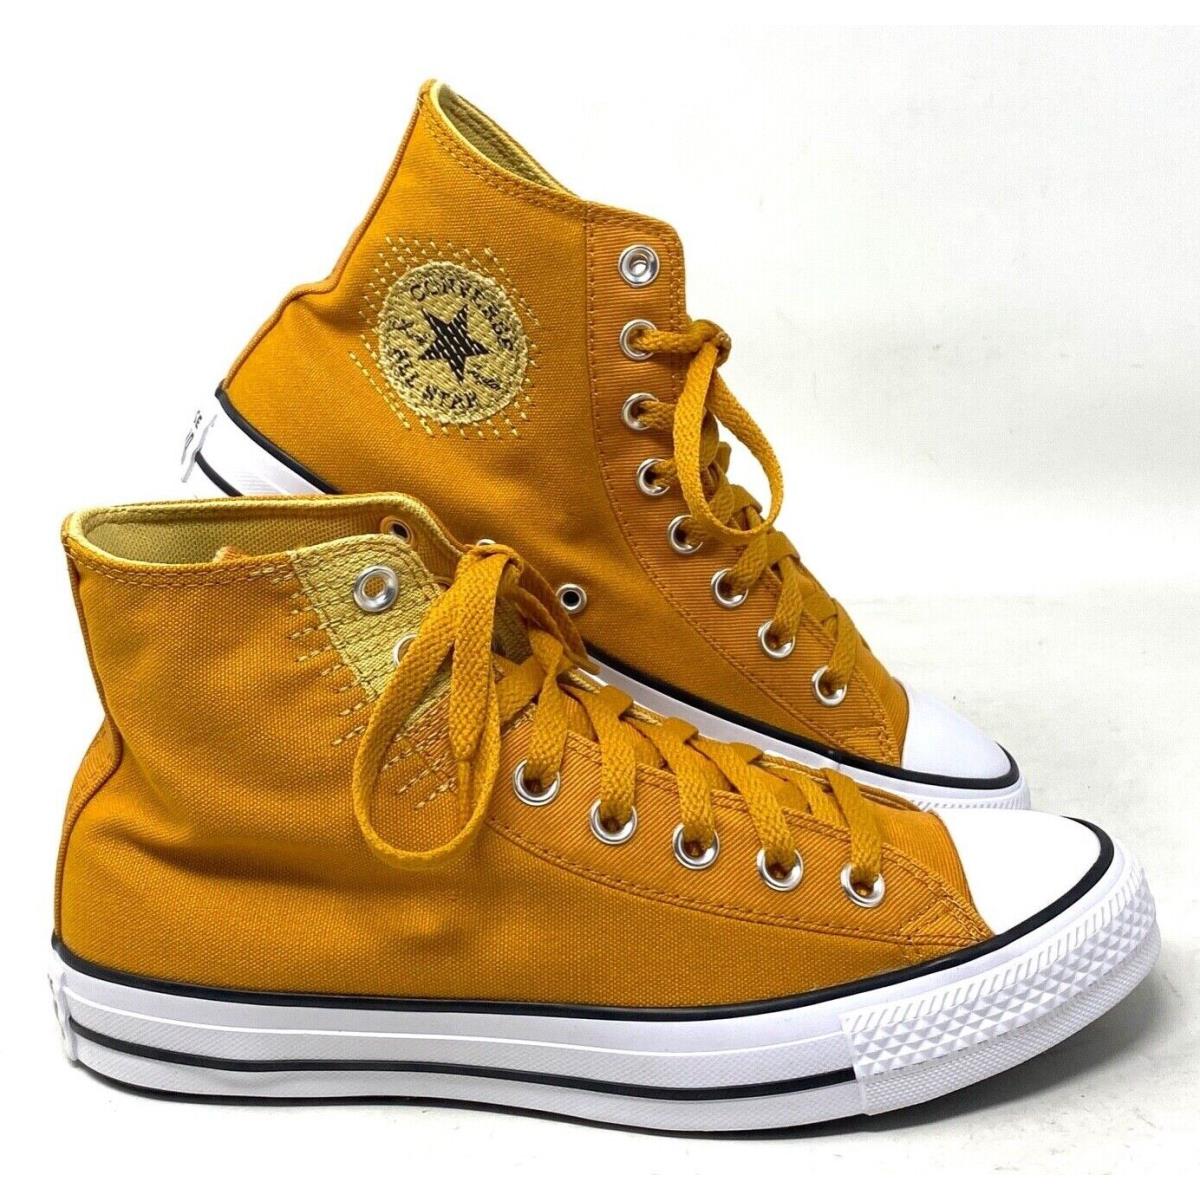 Converse Ctas High Canvas Yellow Shoes For Women Skate Sneakers Casual A05032F